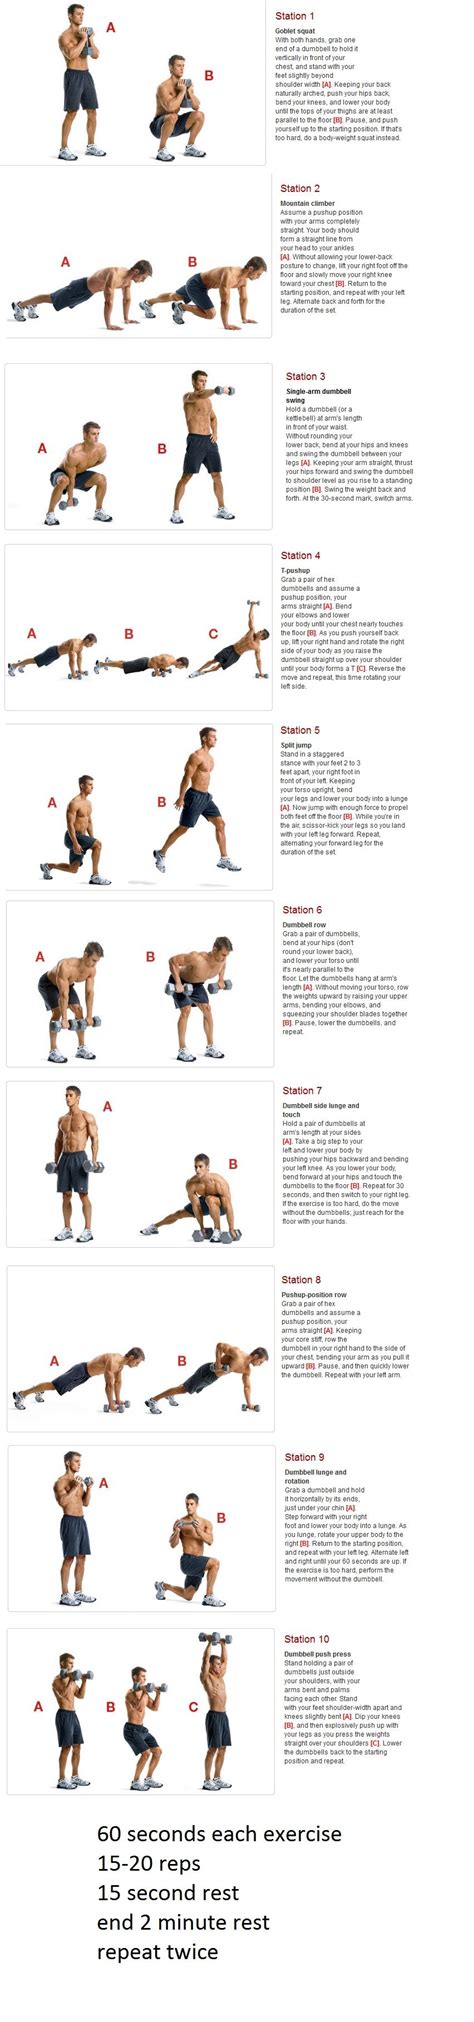 The spartacus workout, named after the famous ancient roman slave and military leader, is going to kick you your butt. Fascinating Bodybuilding Pin re-pinned by Golden Age ...